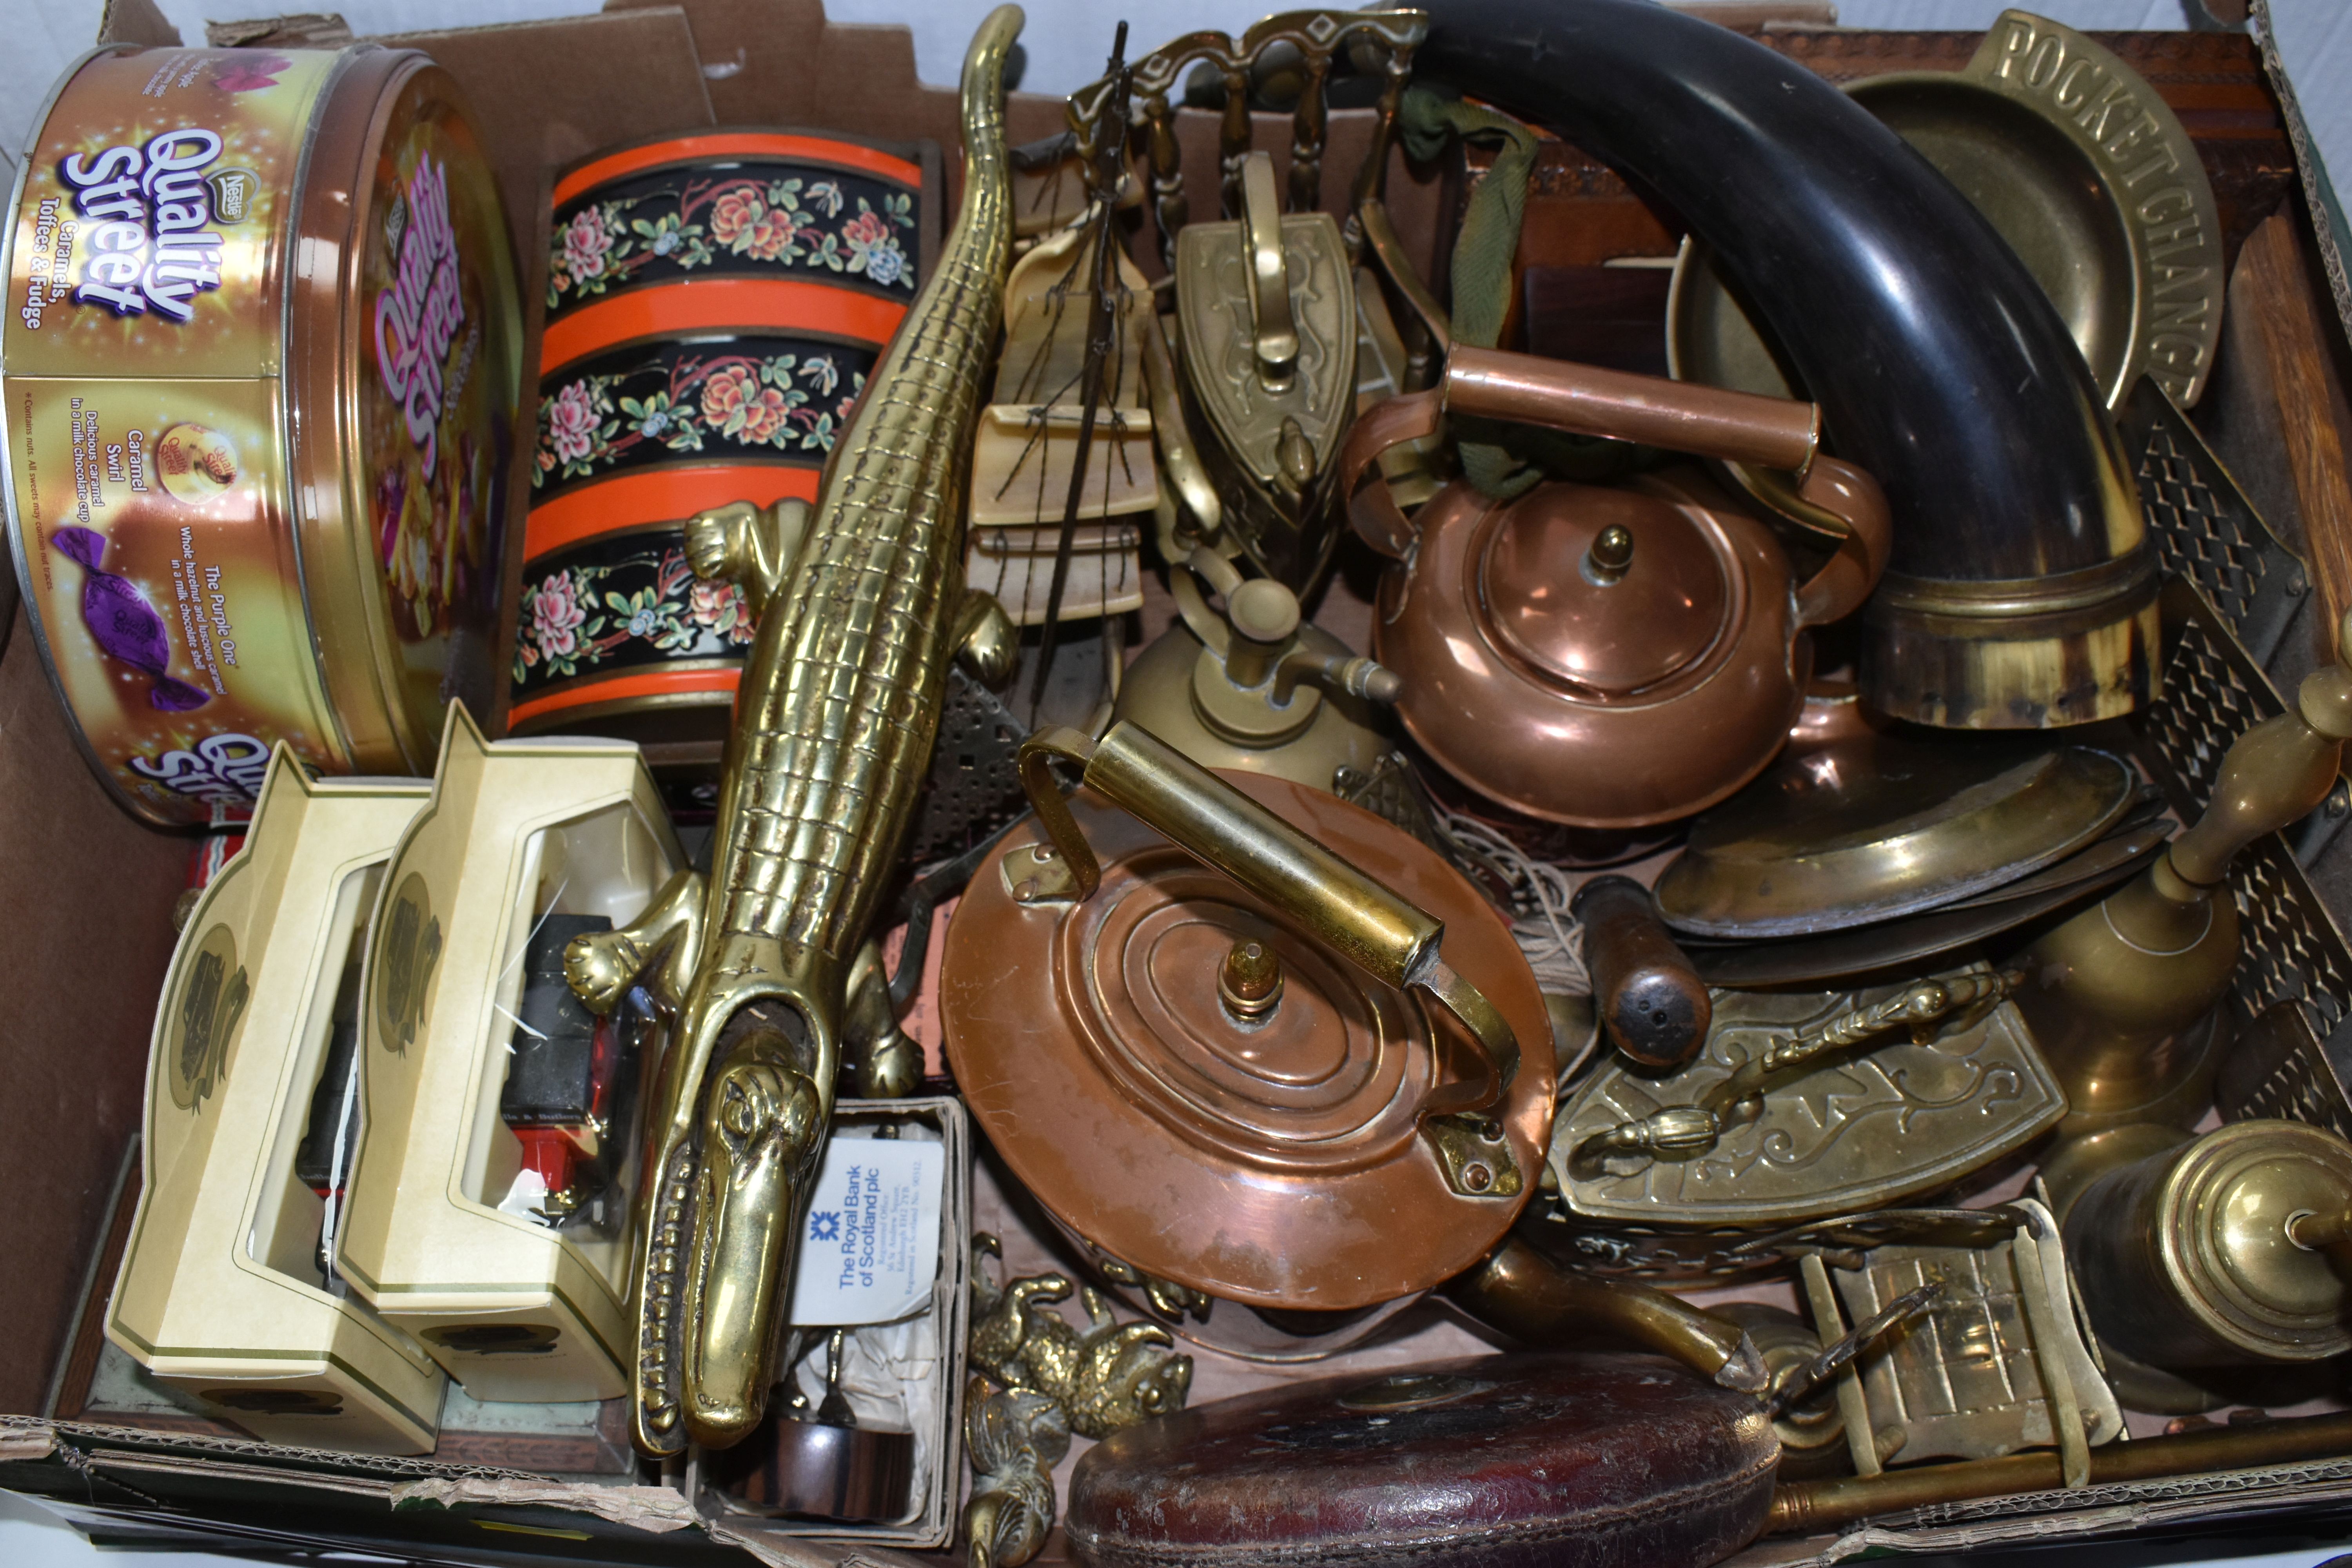 A BOX AND LOOSE METALWARE AND SUNDRY ITEMS, to include two small copper kettles, a horn made from - Image 5 of 9